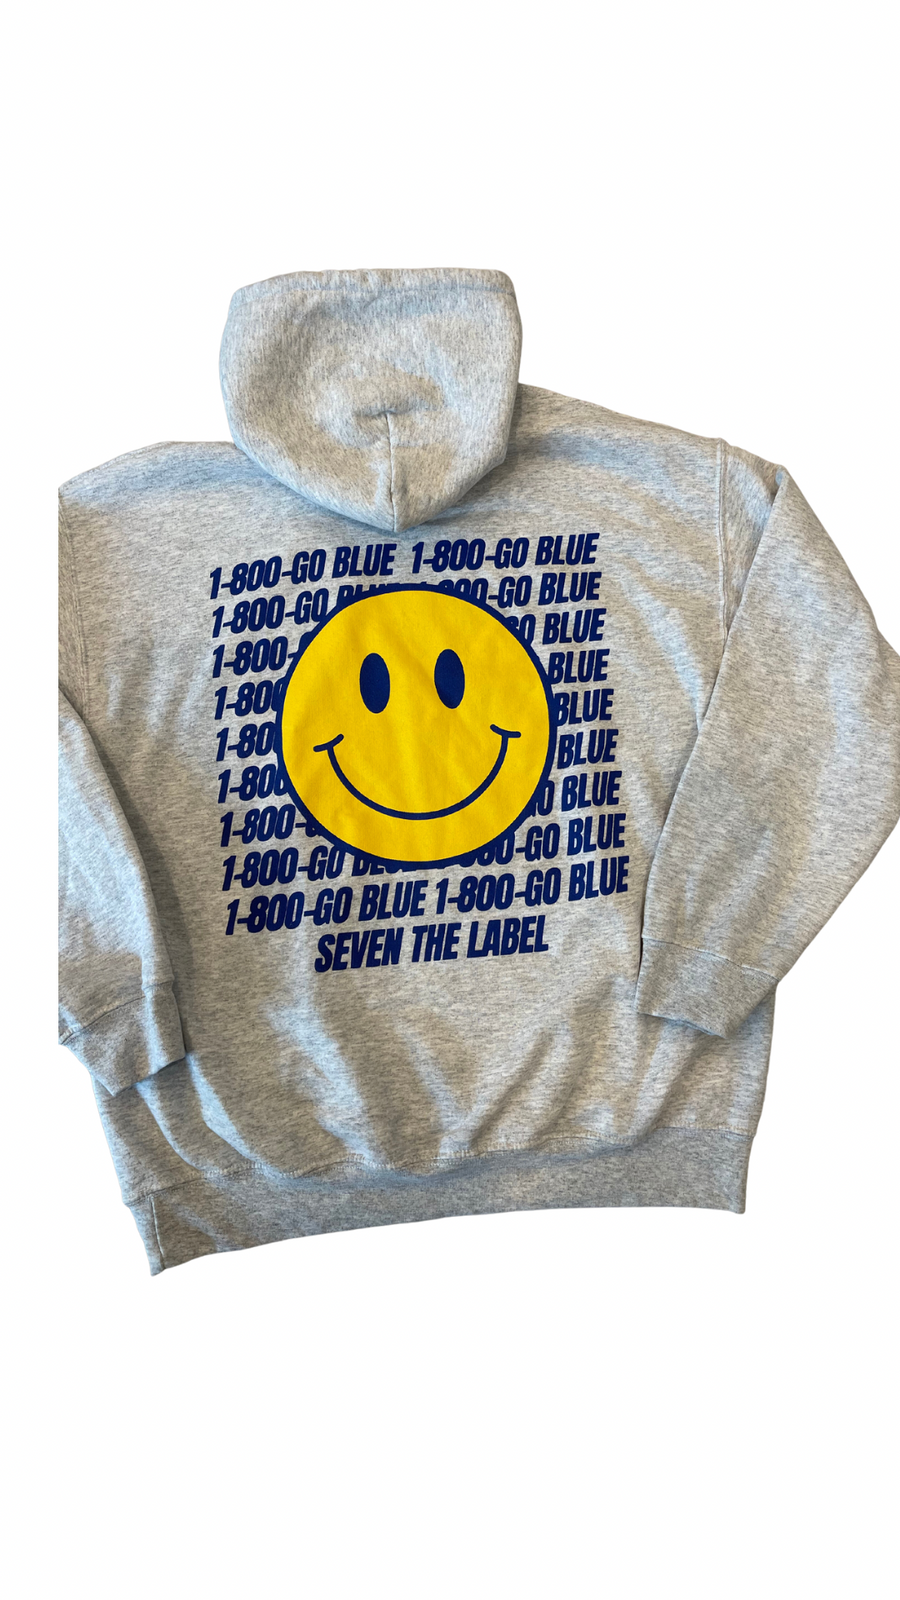 1-800 go blue hoodie – SEVEN the label